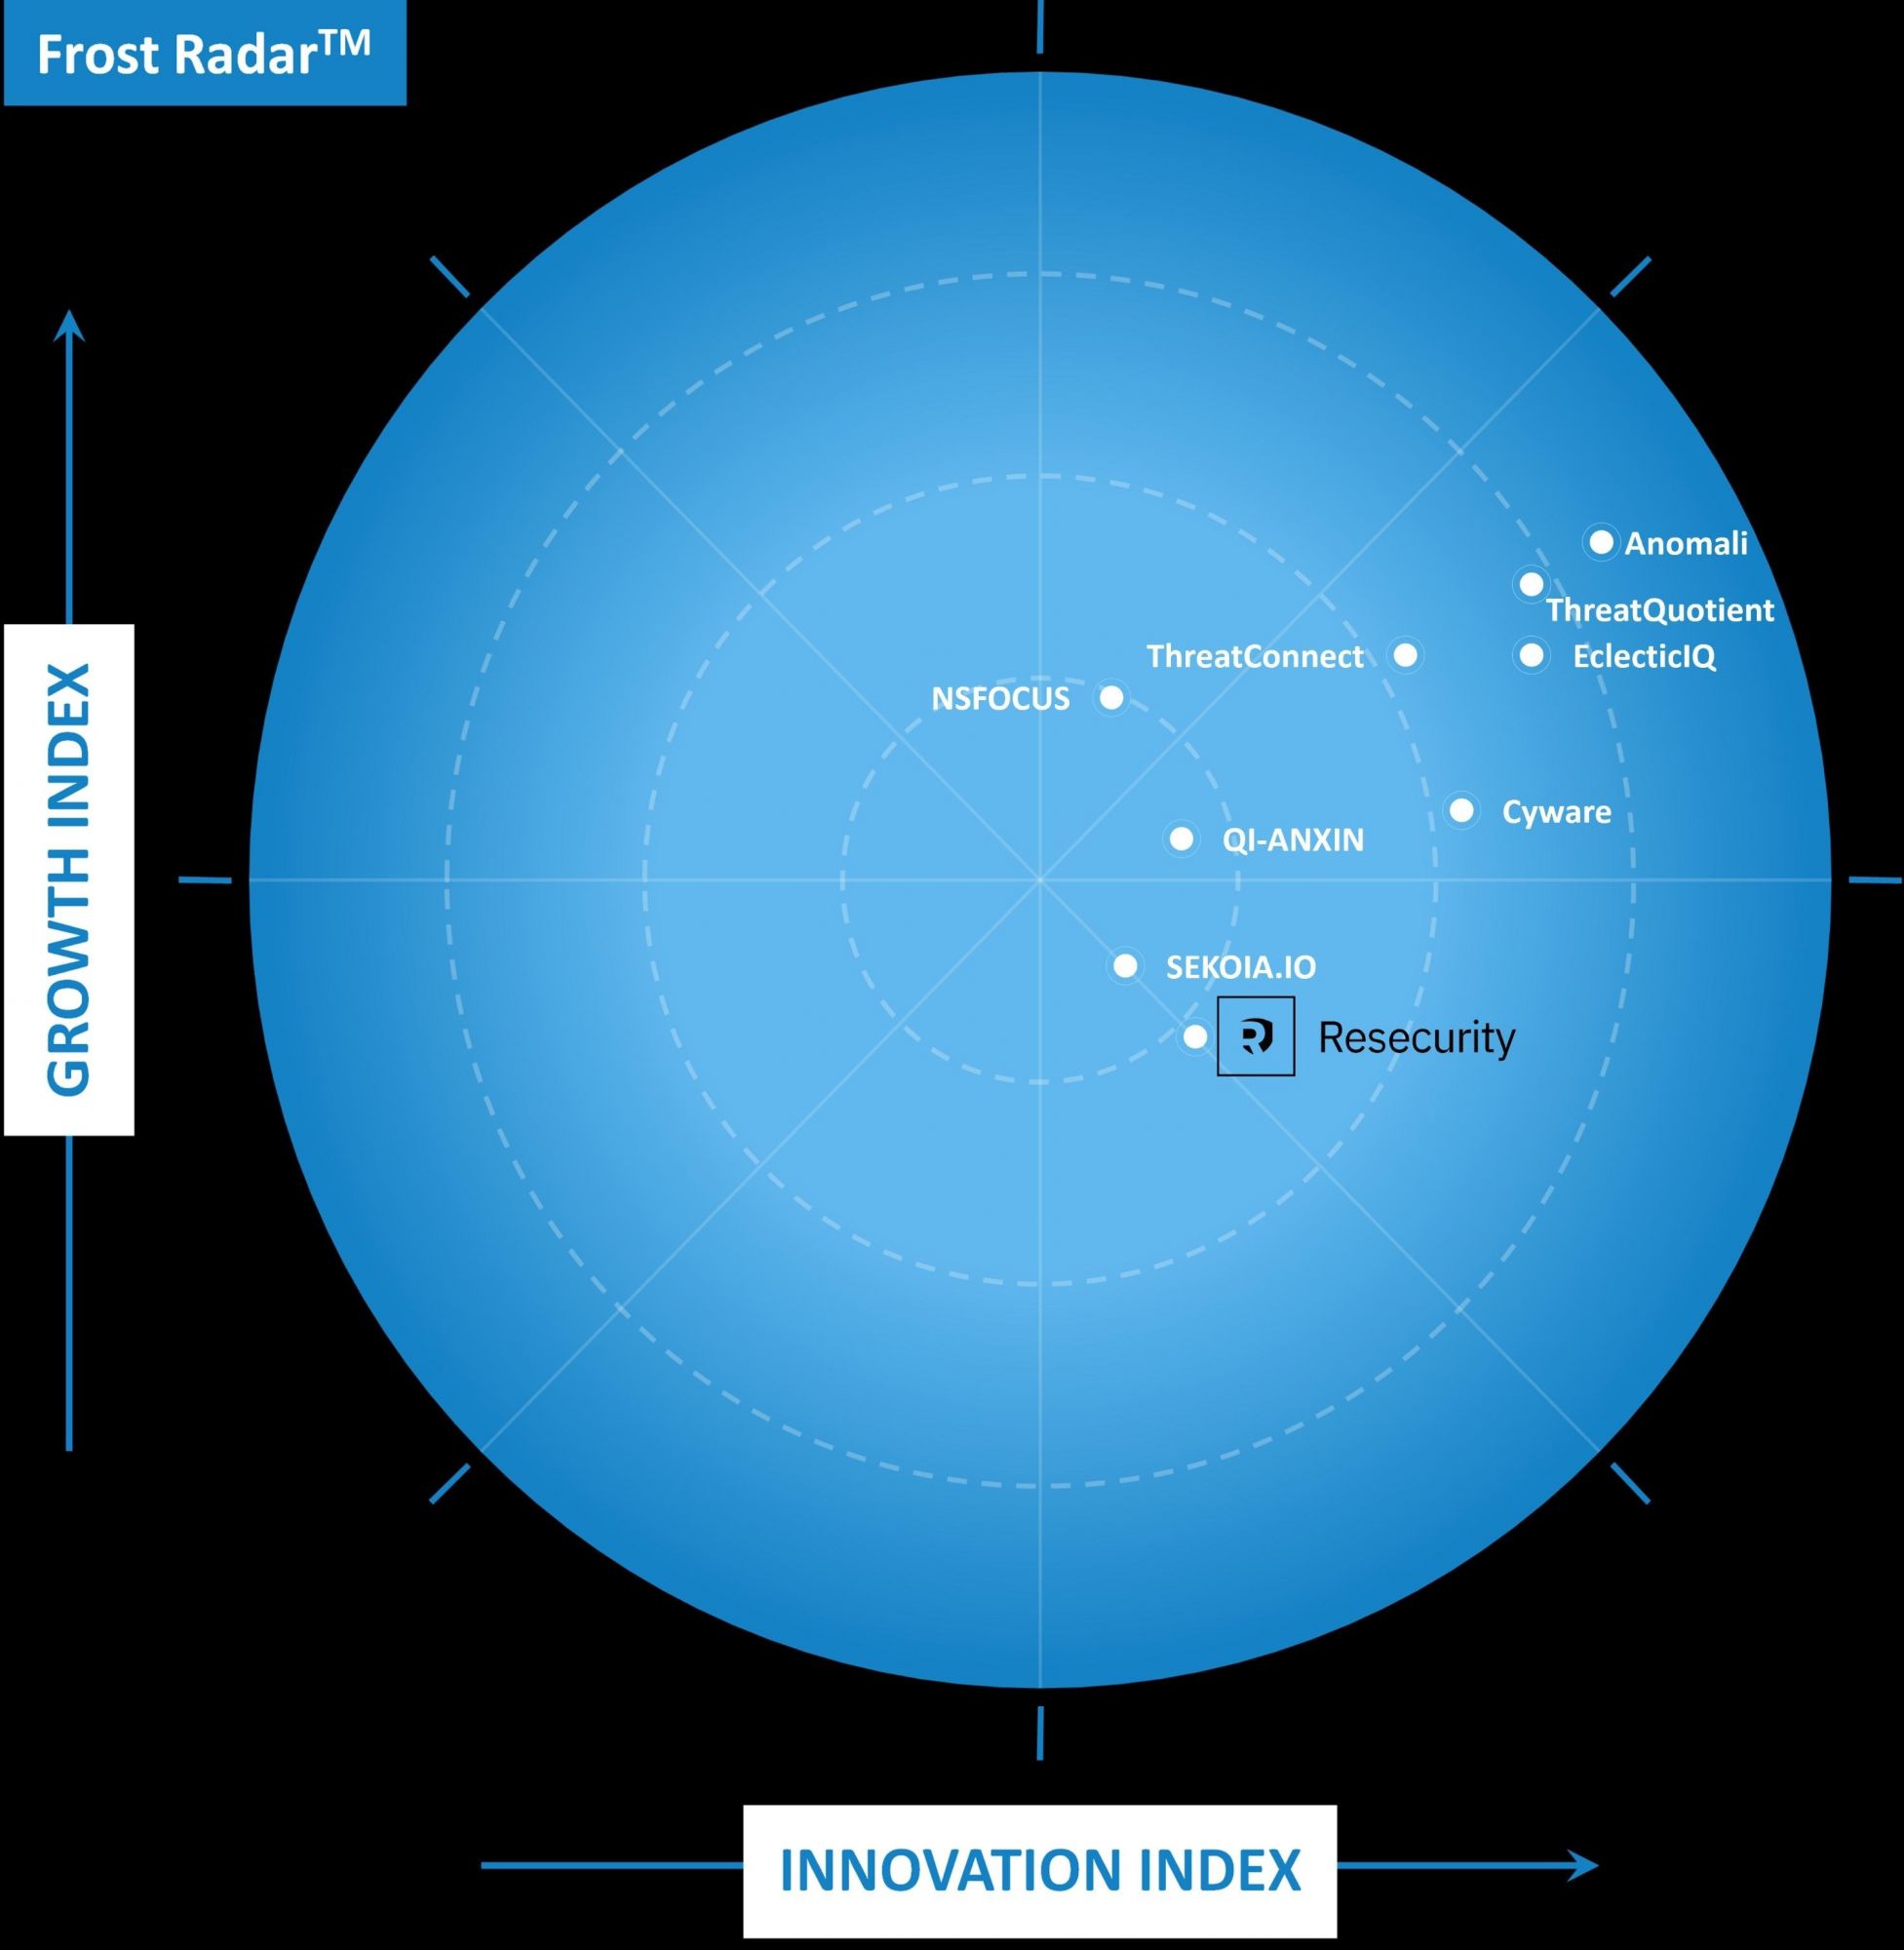 frost radar resecurity cyber security global threat intelligence